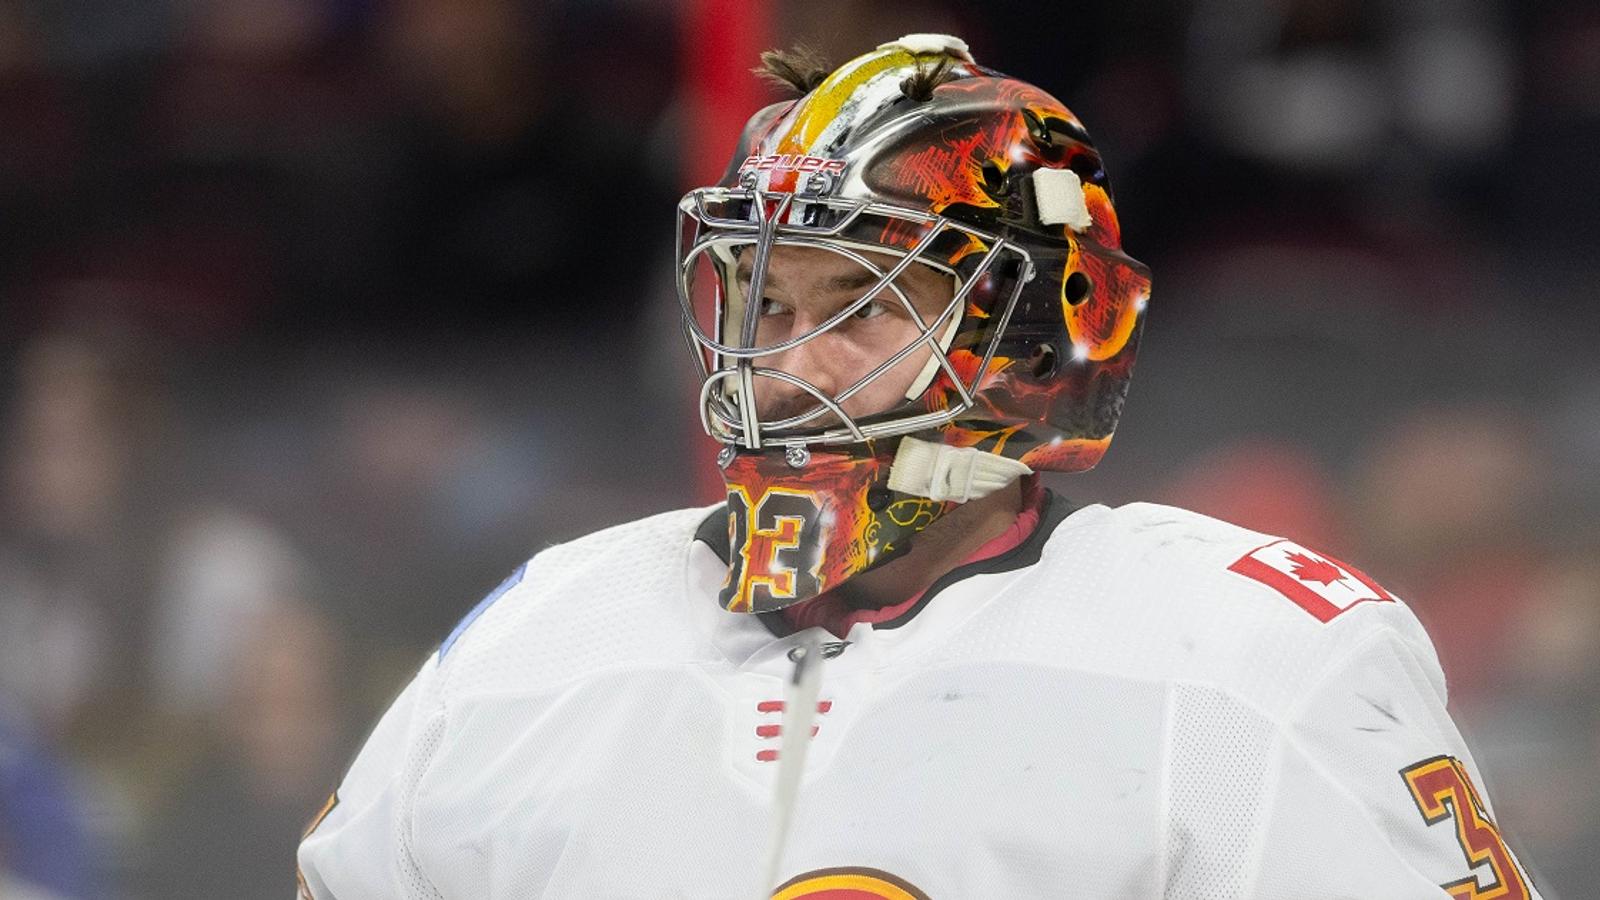 The Maple Leafs have acquired goaltender David Rittich.